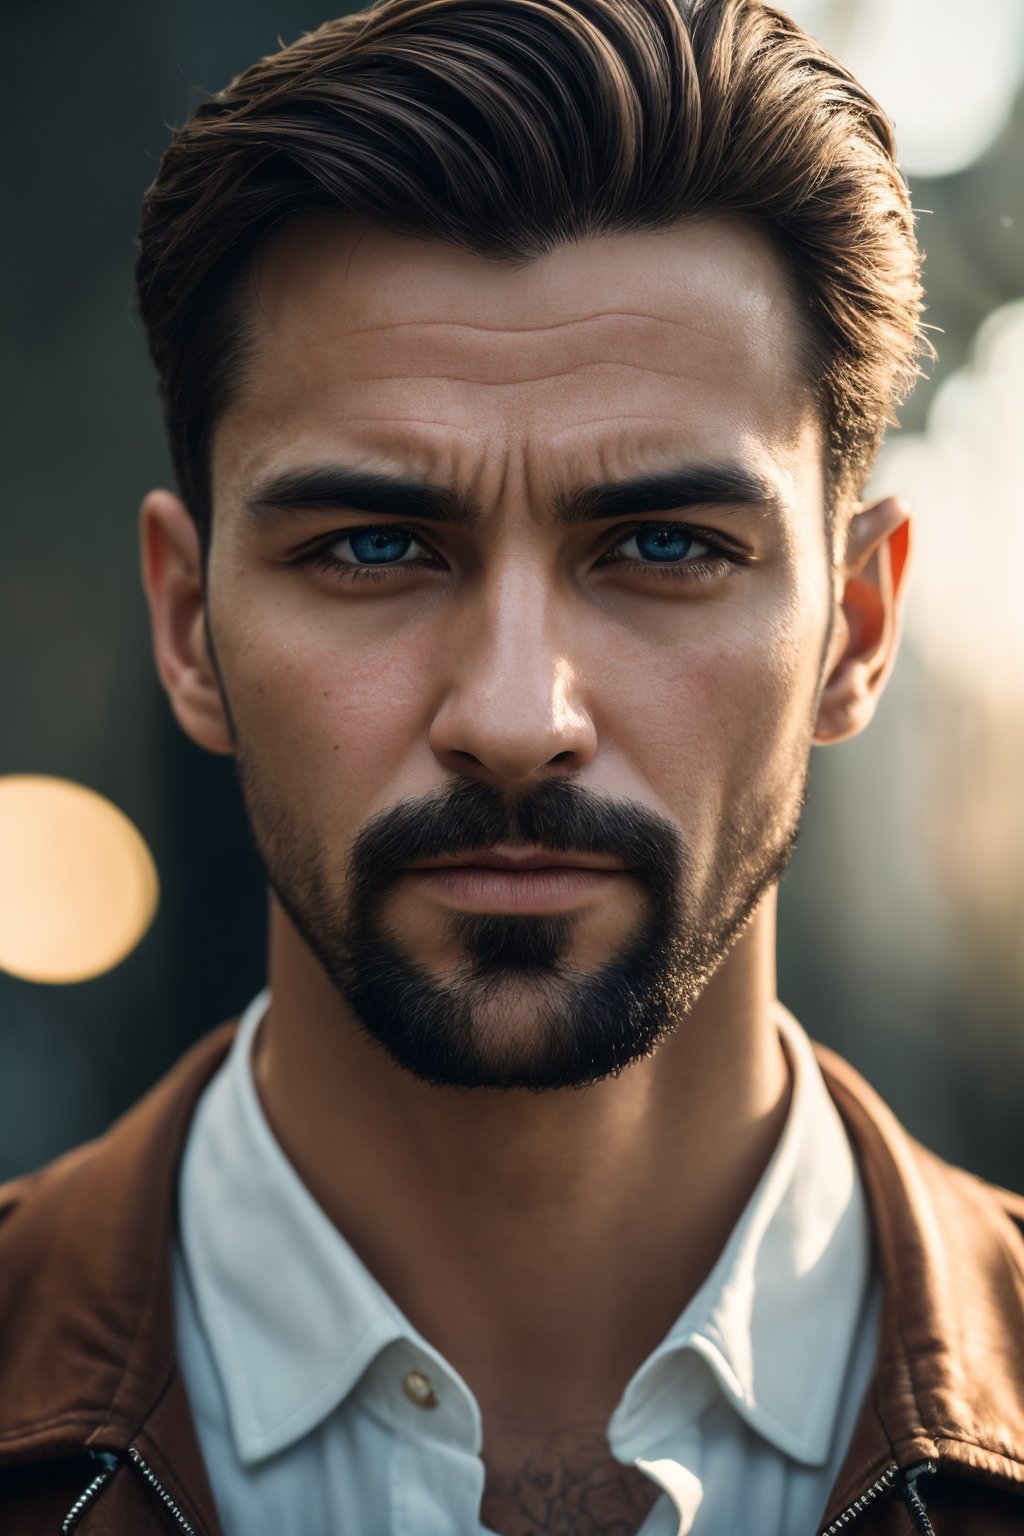 An (intimate, emotive) 8K photograph that focuses on the close-up portrait of a man. The (rich, vibrant) colors enhance the photo-realistic quality, giving you a cinematic view of his personality and expressions in exquisite detail.